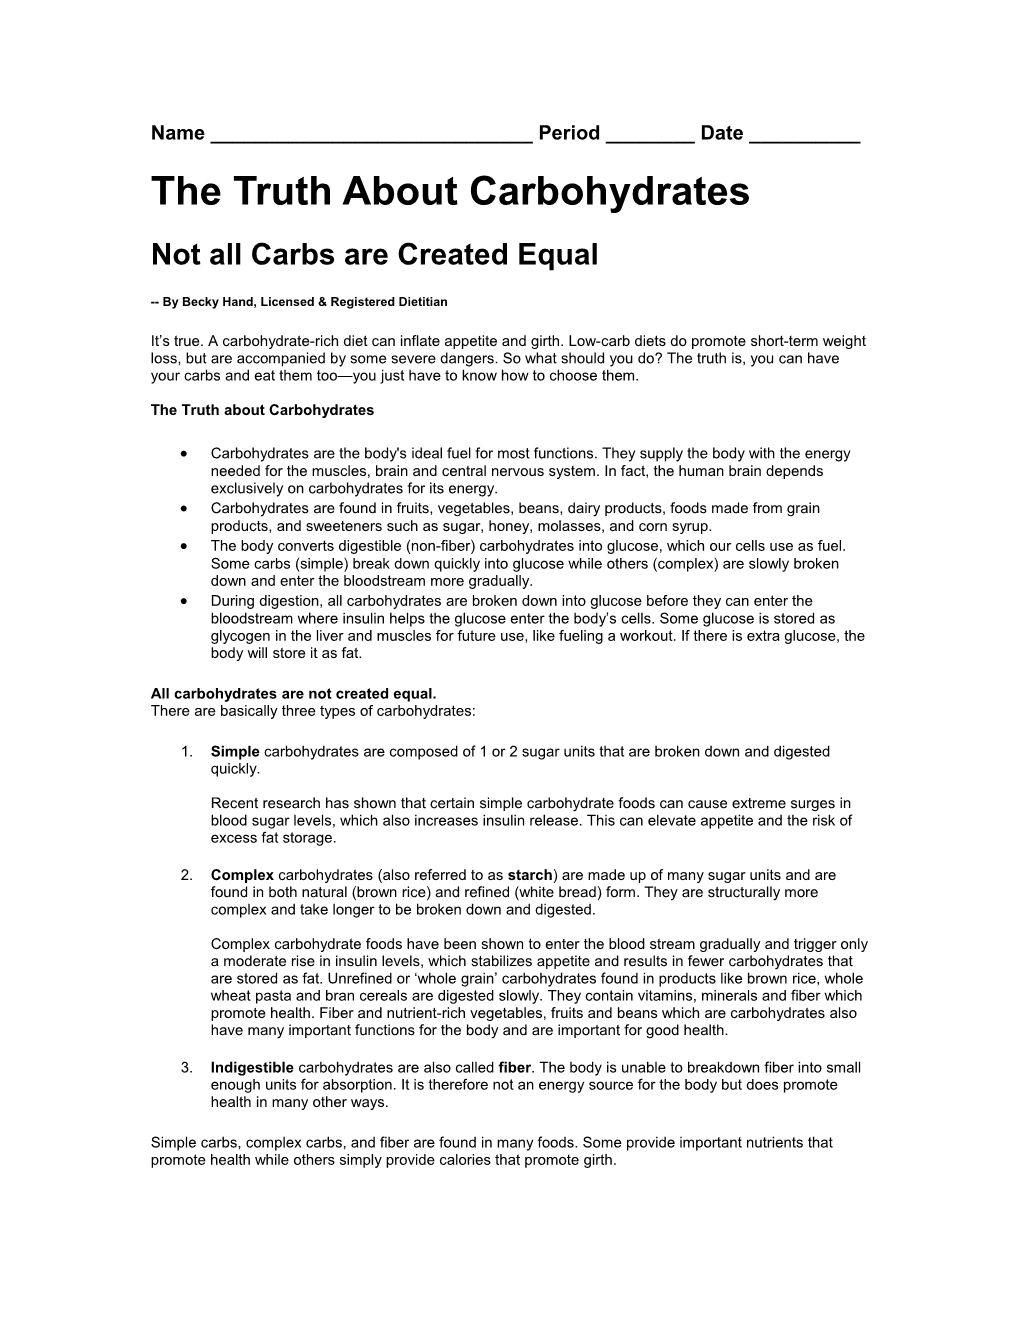 The Truth About Carbohydrates